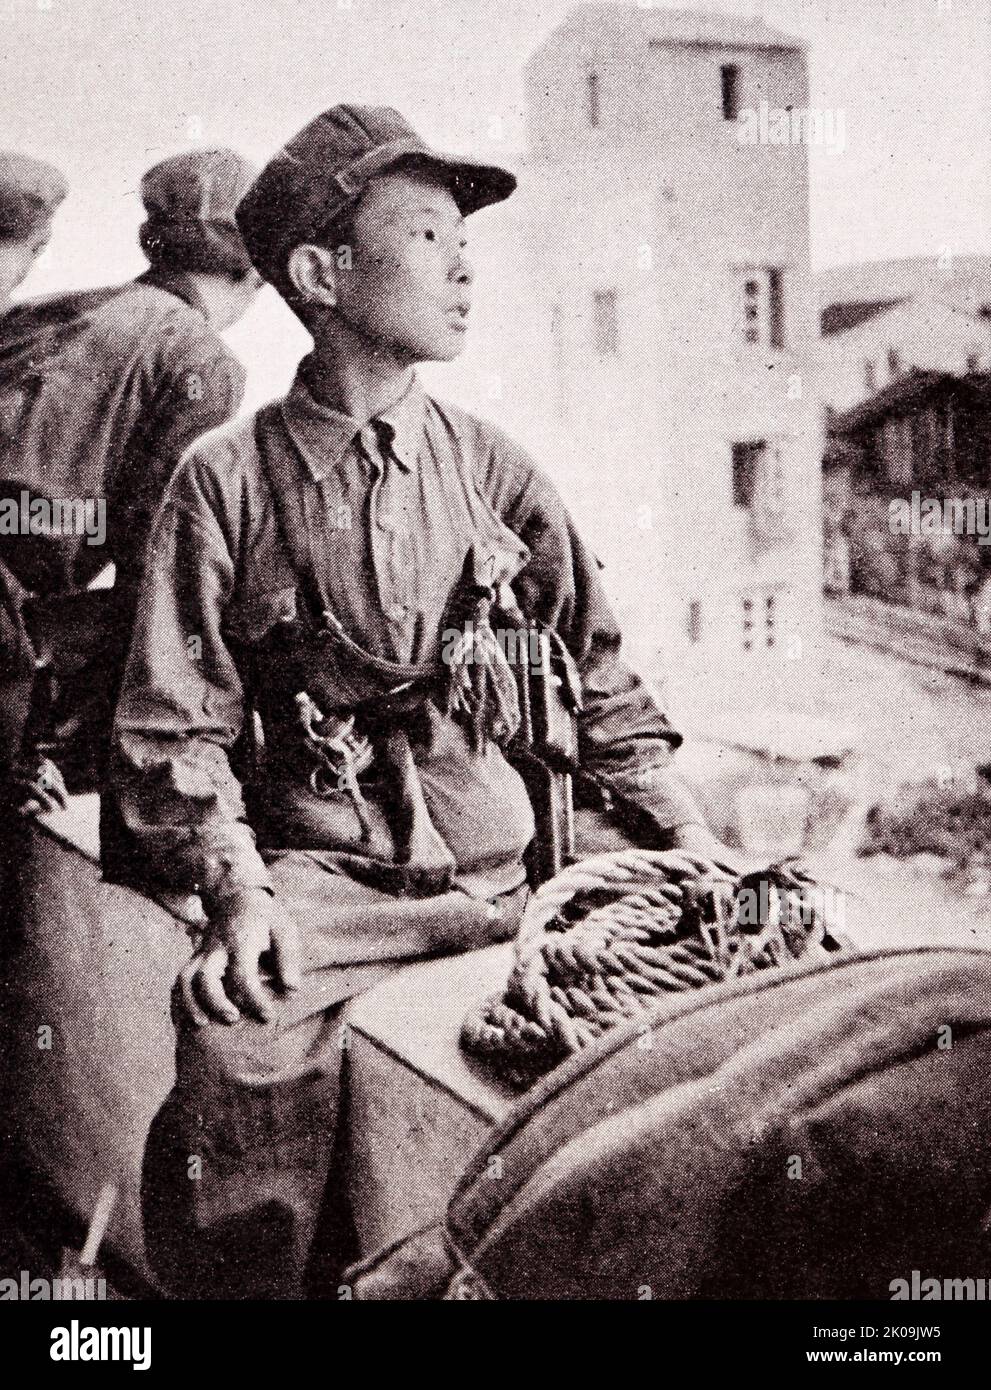 The Chinese Workers' and Peasants' Red Army (Zhongguo Gongnong Hongjun),  also known as the Chinese Red Army, or simply the Red Army, was a group army  under the command of the Communist